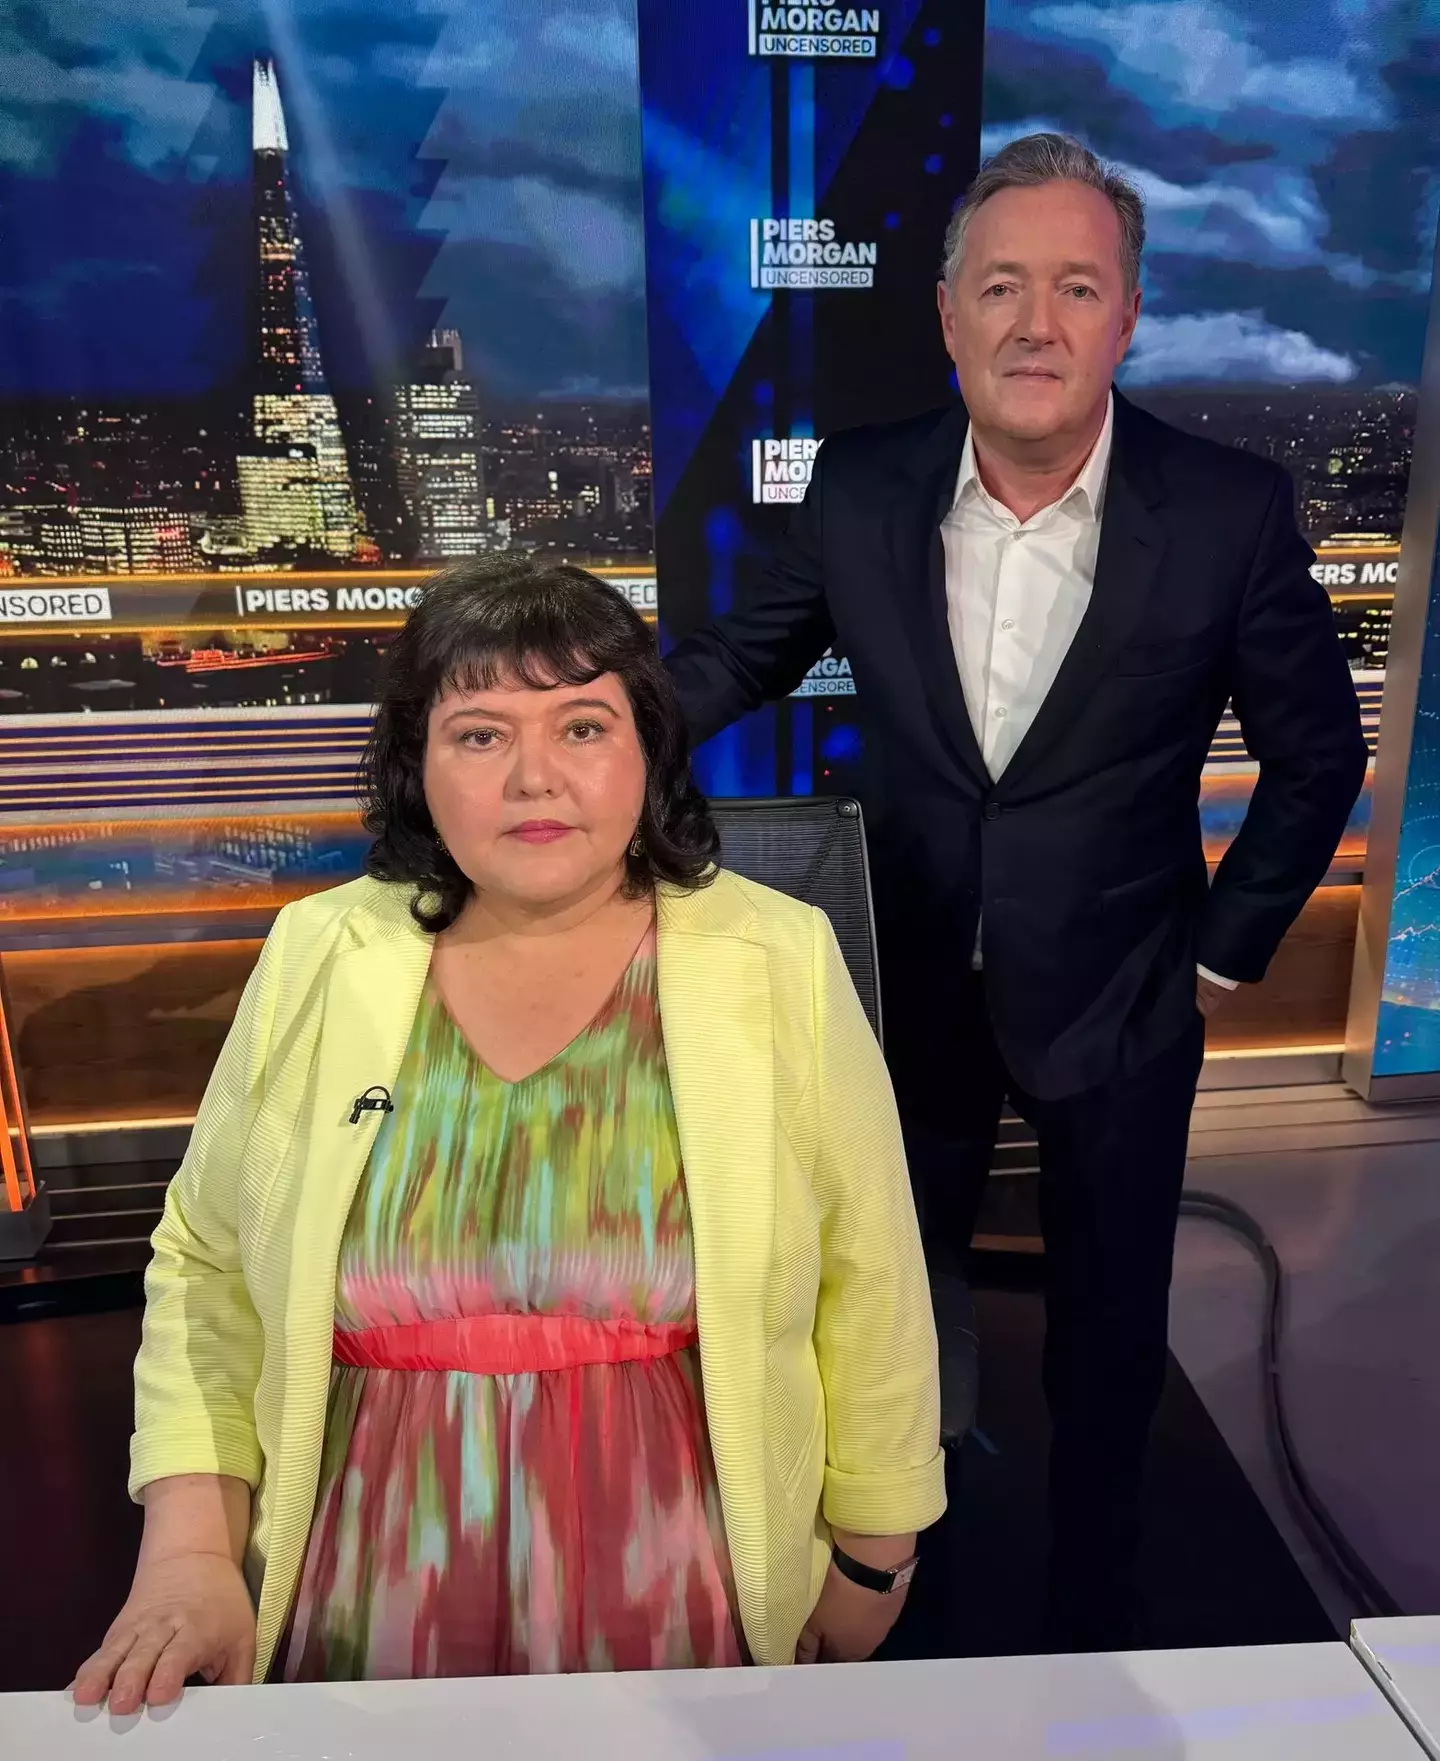 Fiona Harvey was grilled by Piers Morgan. (Talk TV)